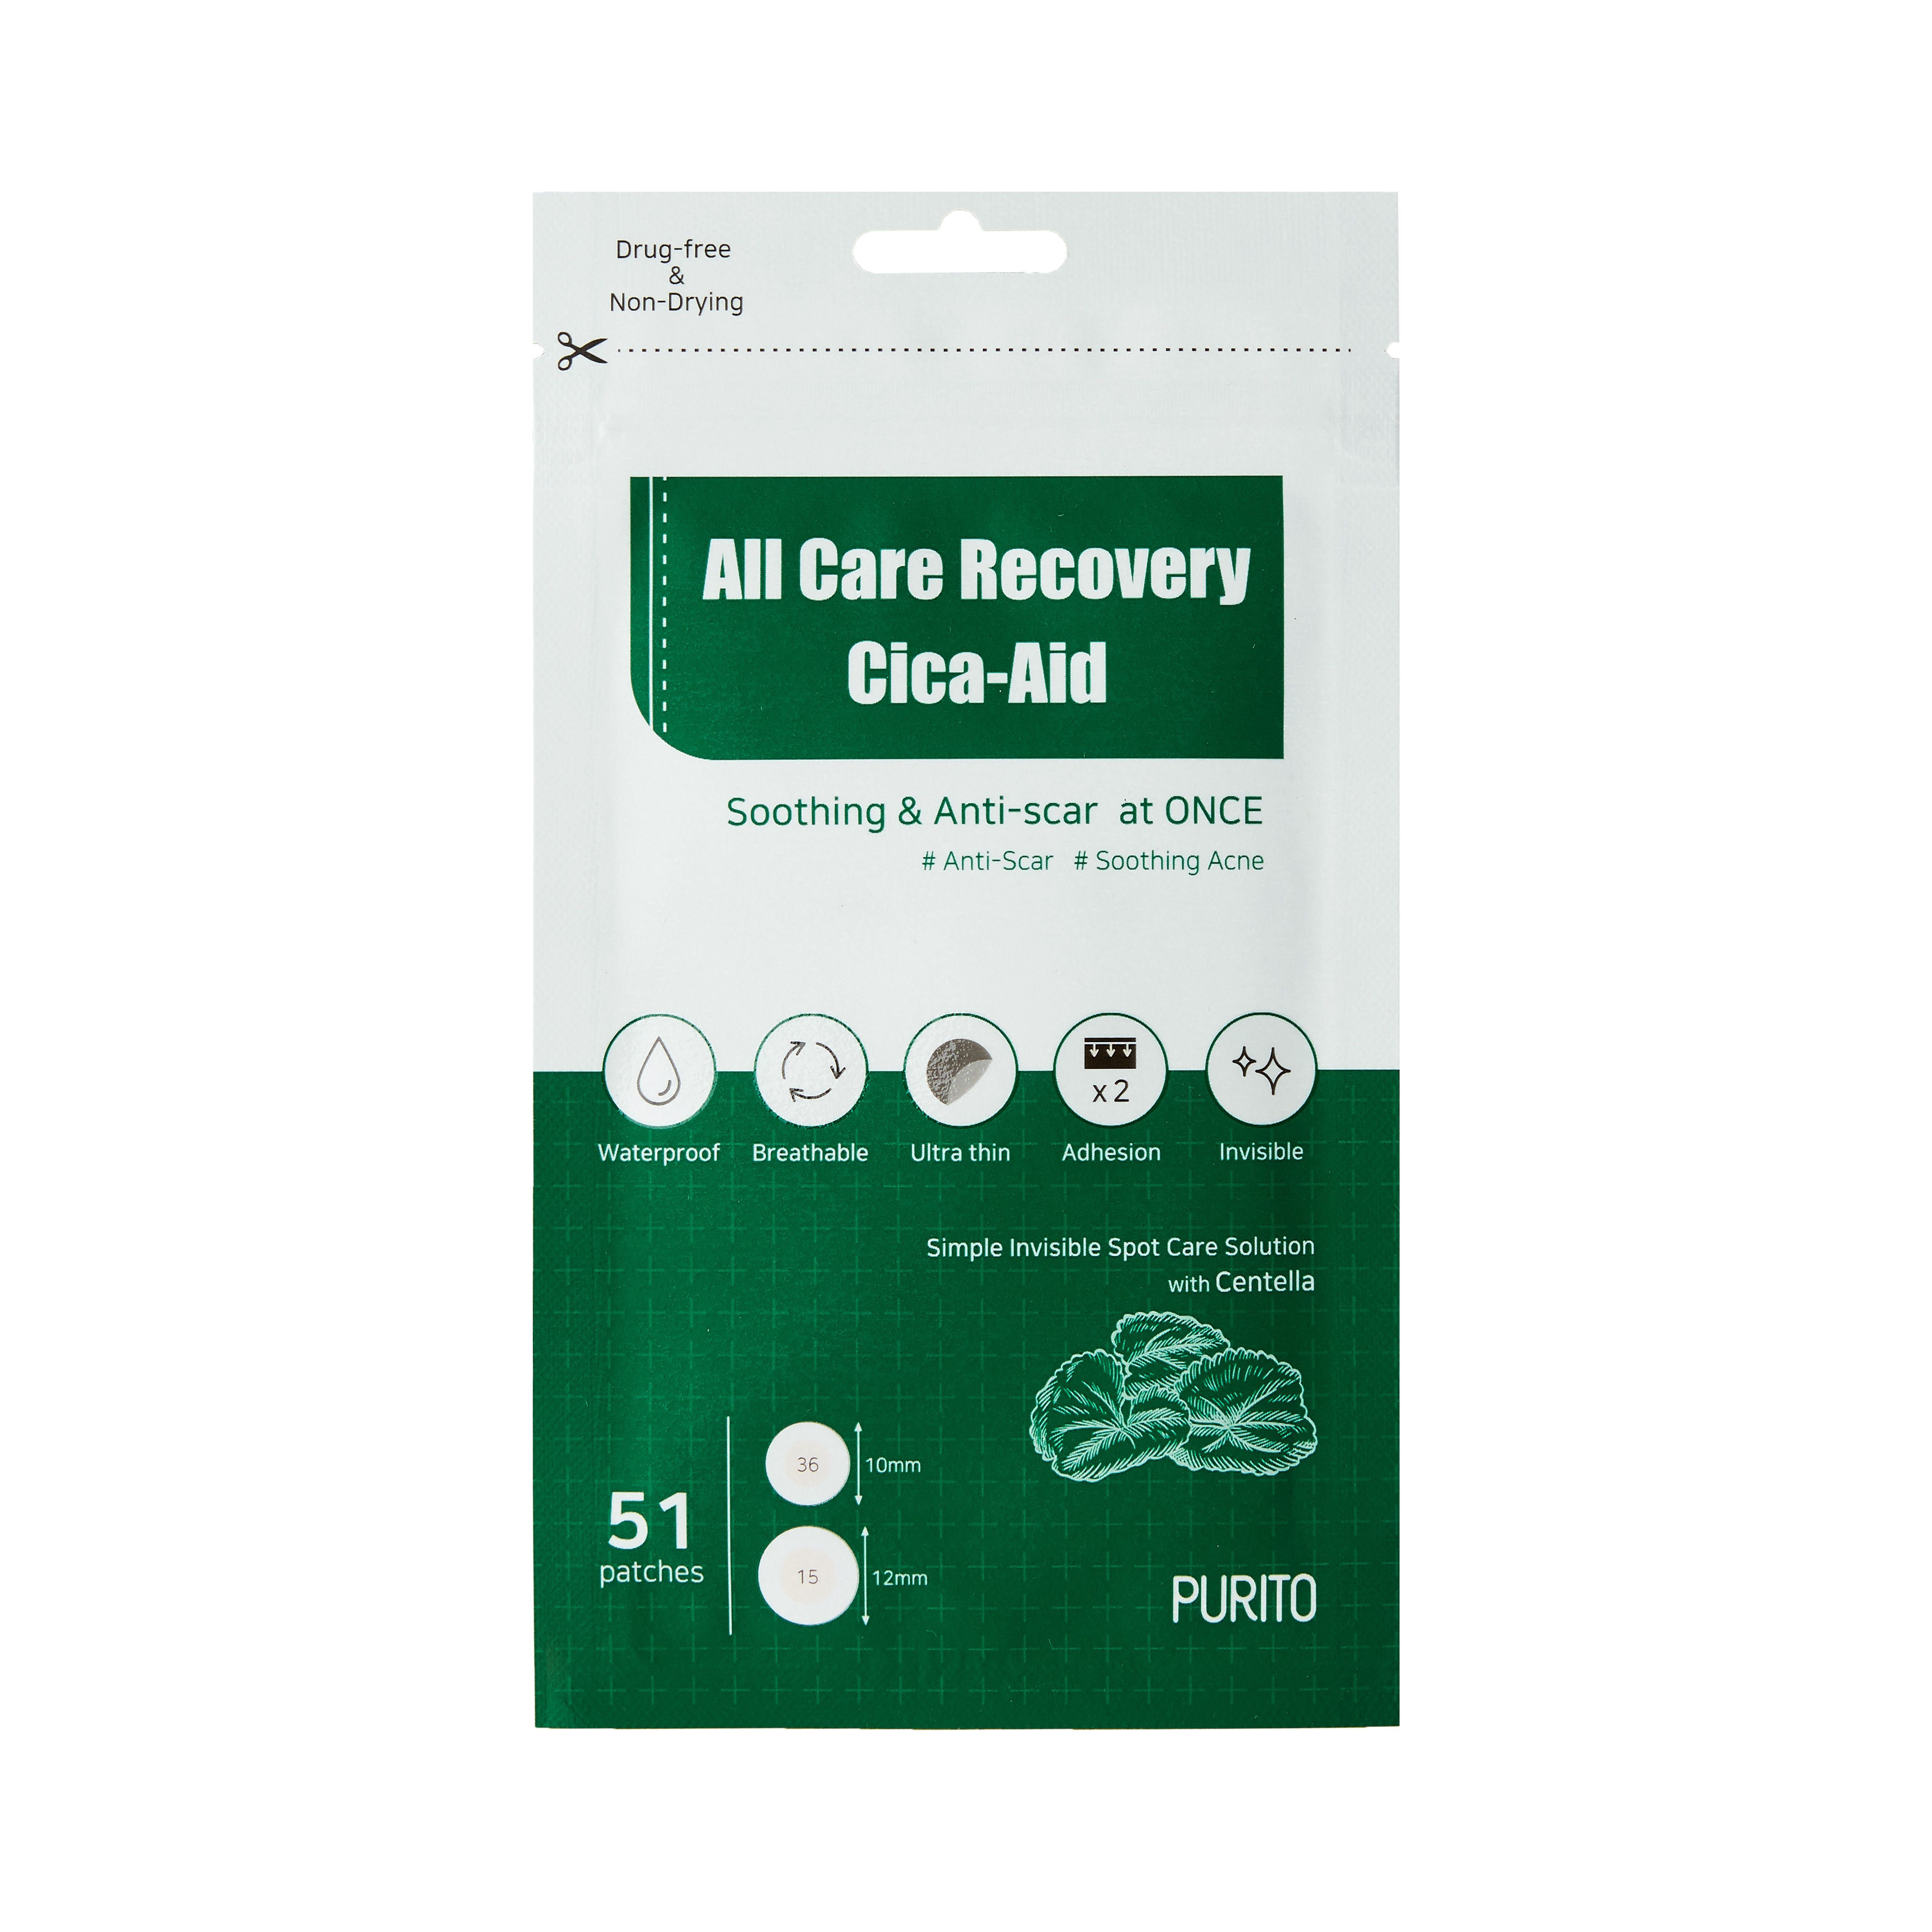 Purito All Care Recovery Cica-Aid 51 pcs  3 sheets